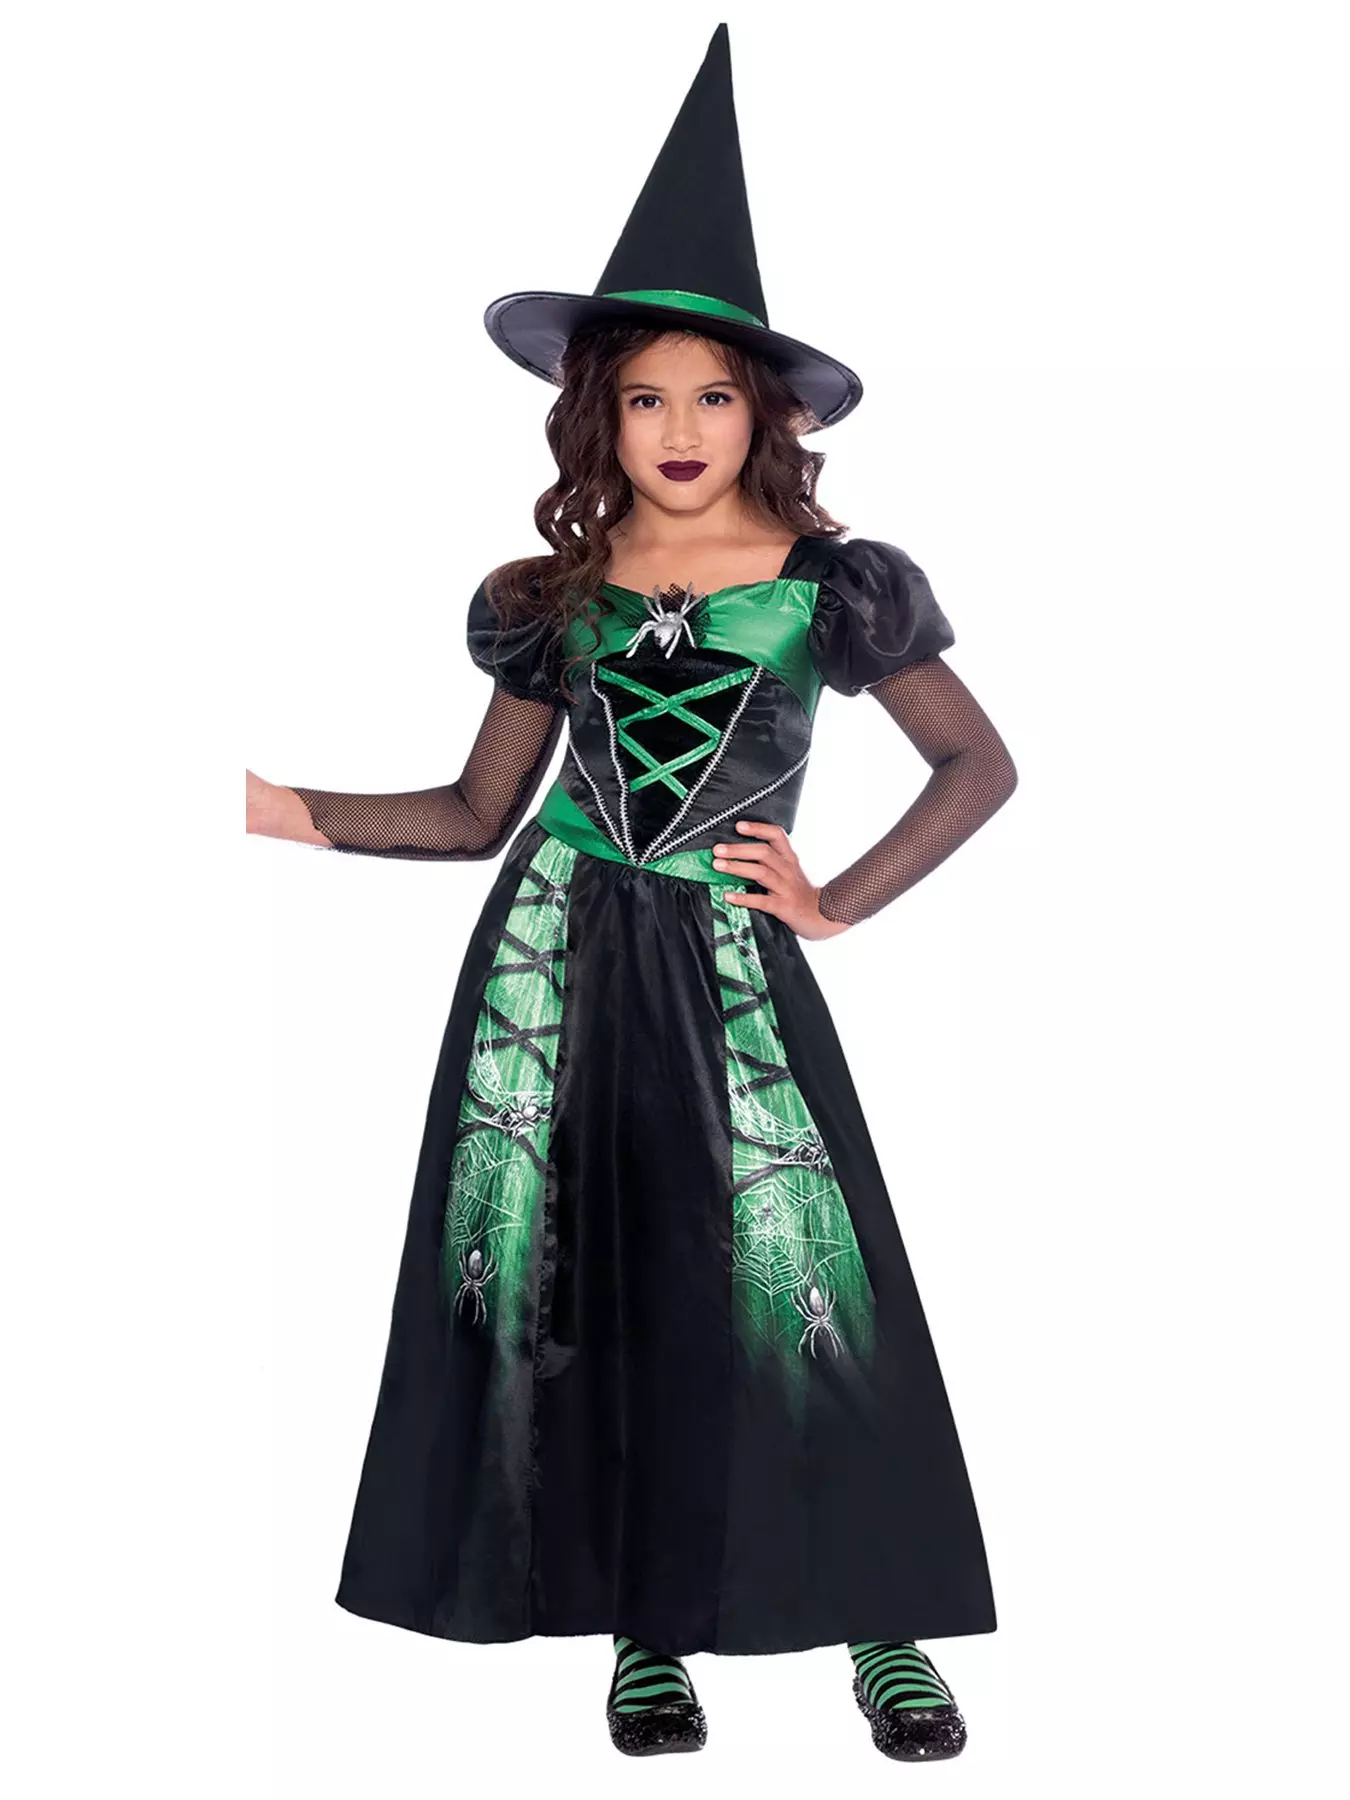 Leg Avenue Women's 3 PC Crafty Witch Costume with Bodysuit, Harness, Hat,  Multi, Large